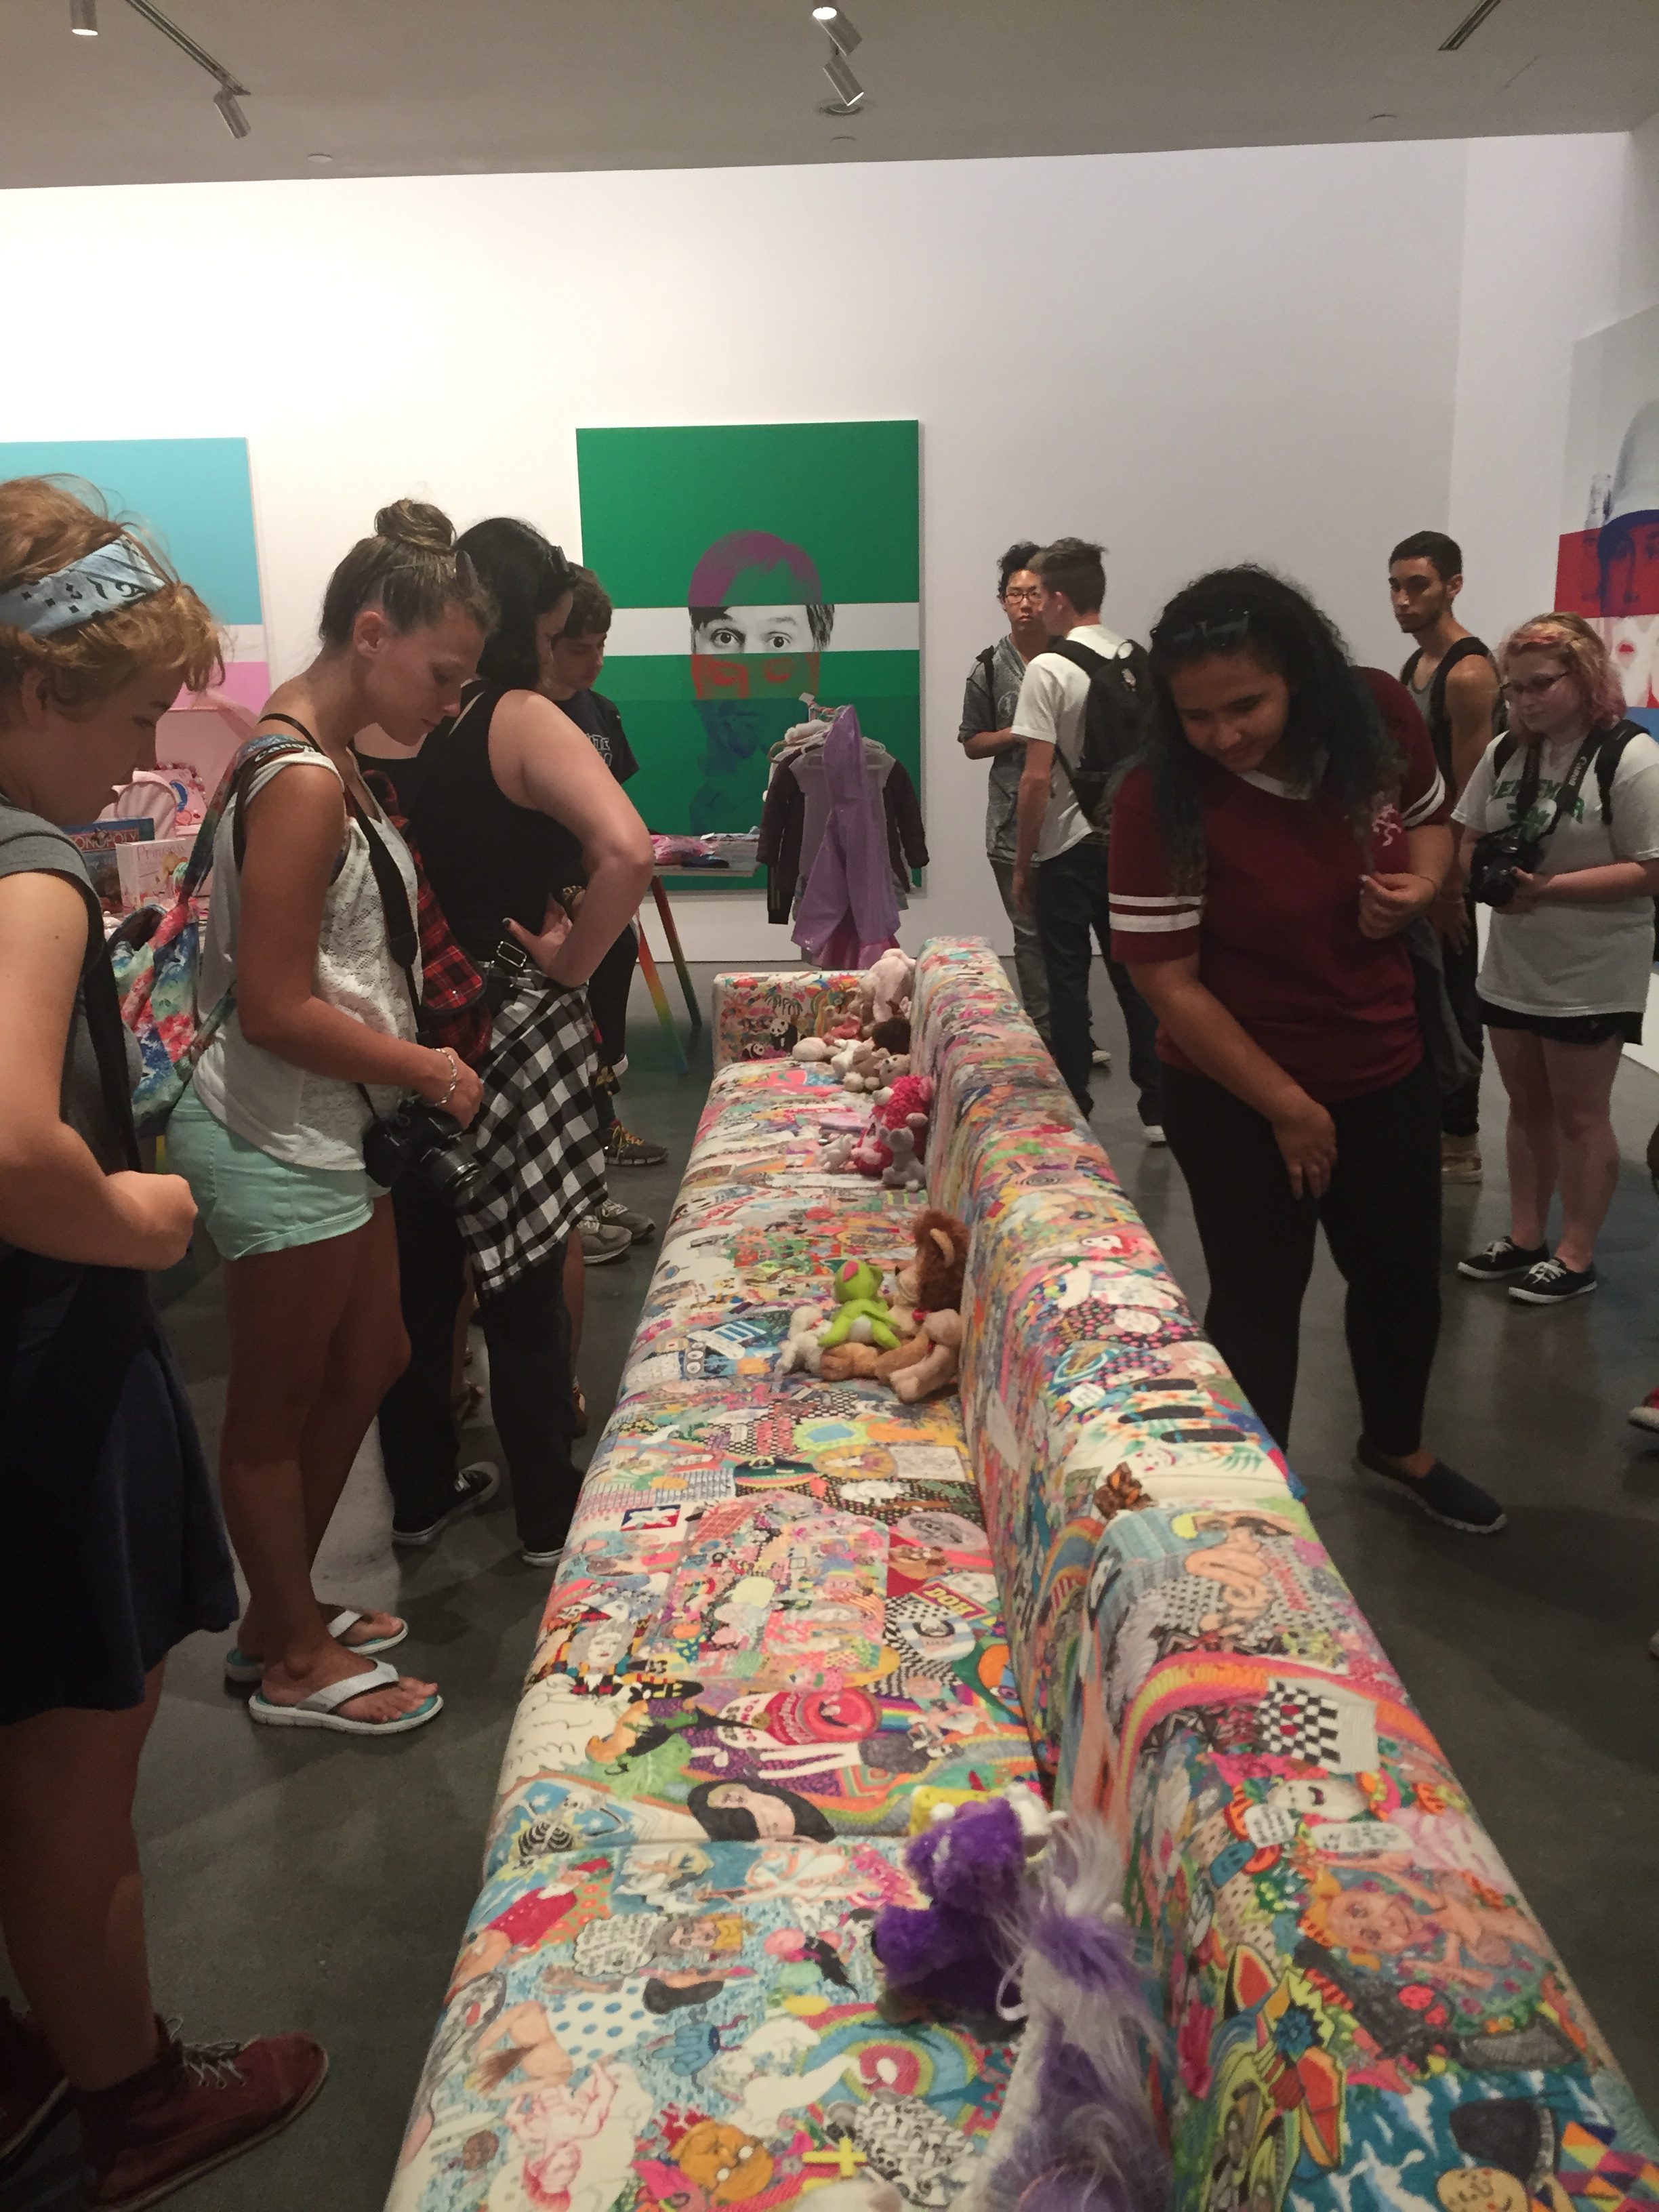 Students visit Rob Pruitt's exhibition at The Brant Foundation